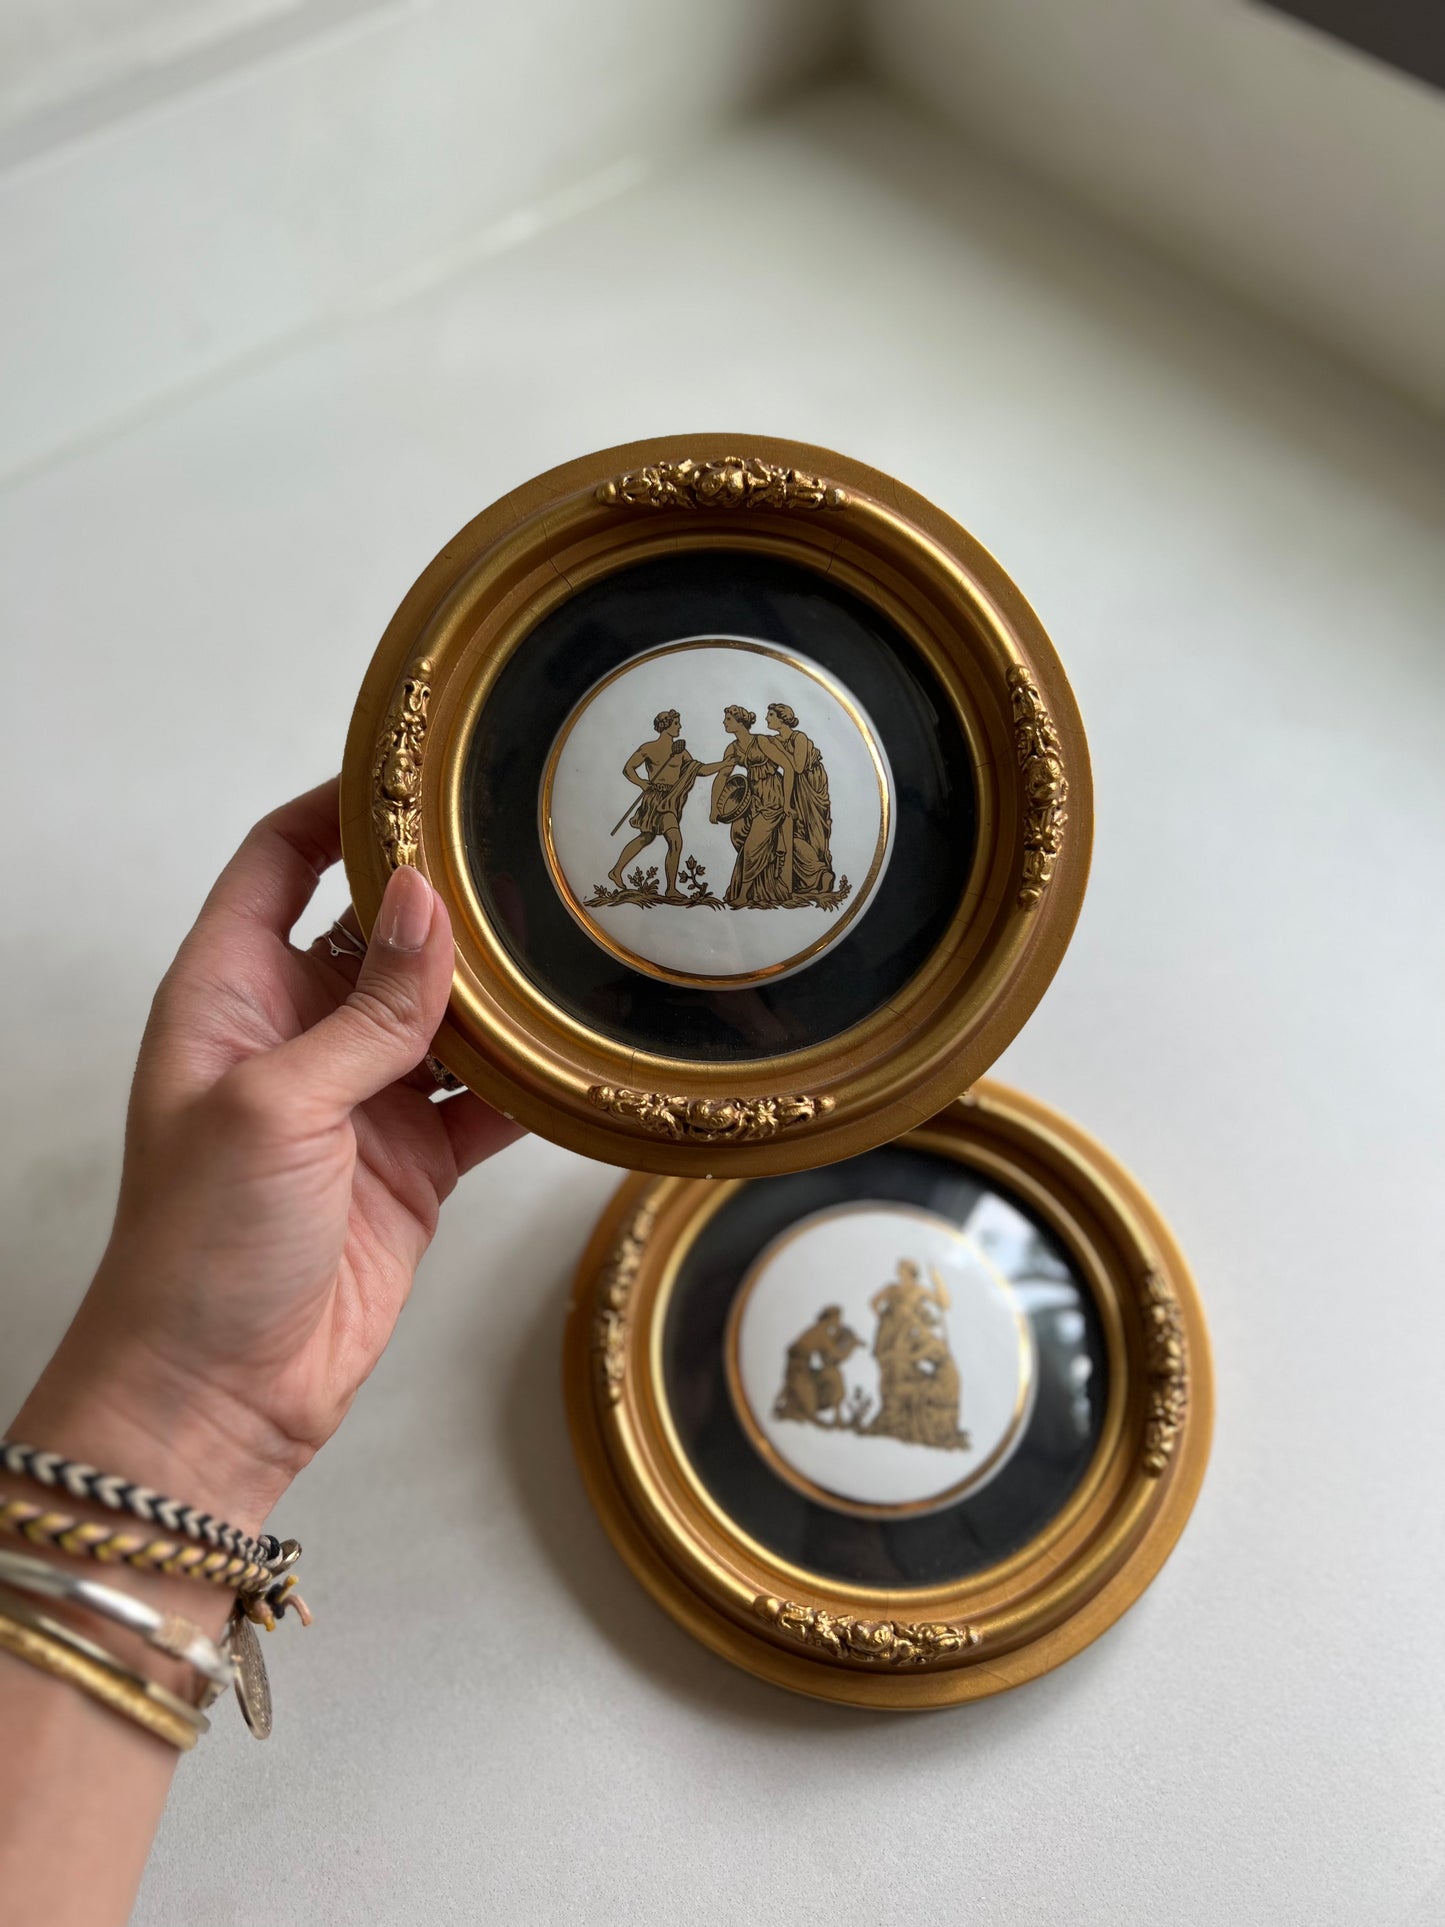 Gilded Shadow Boxes, Pair